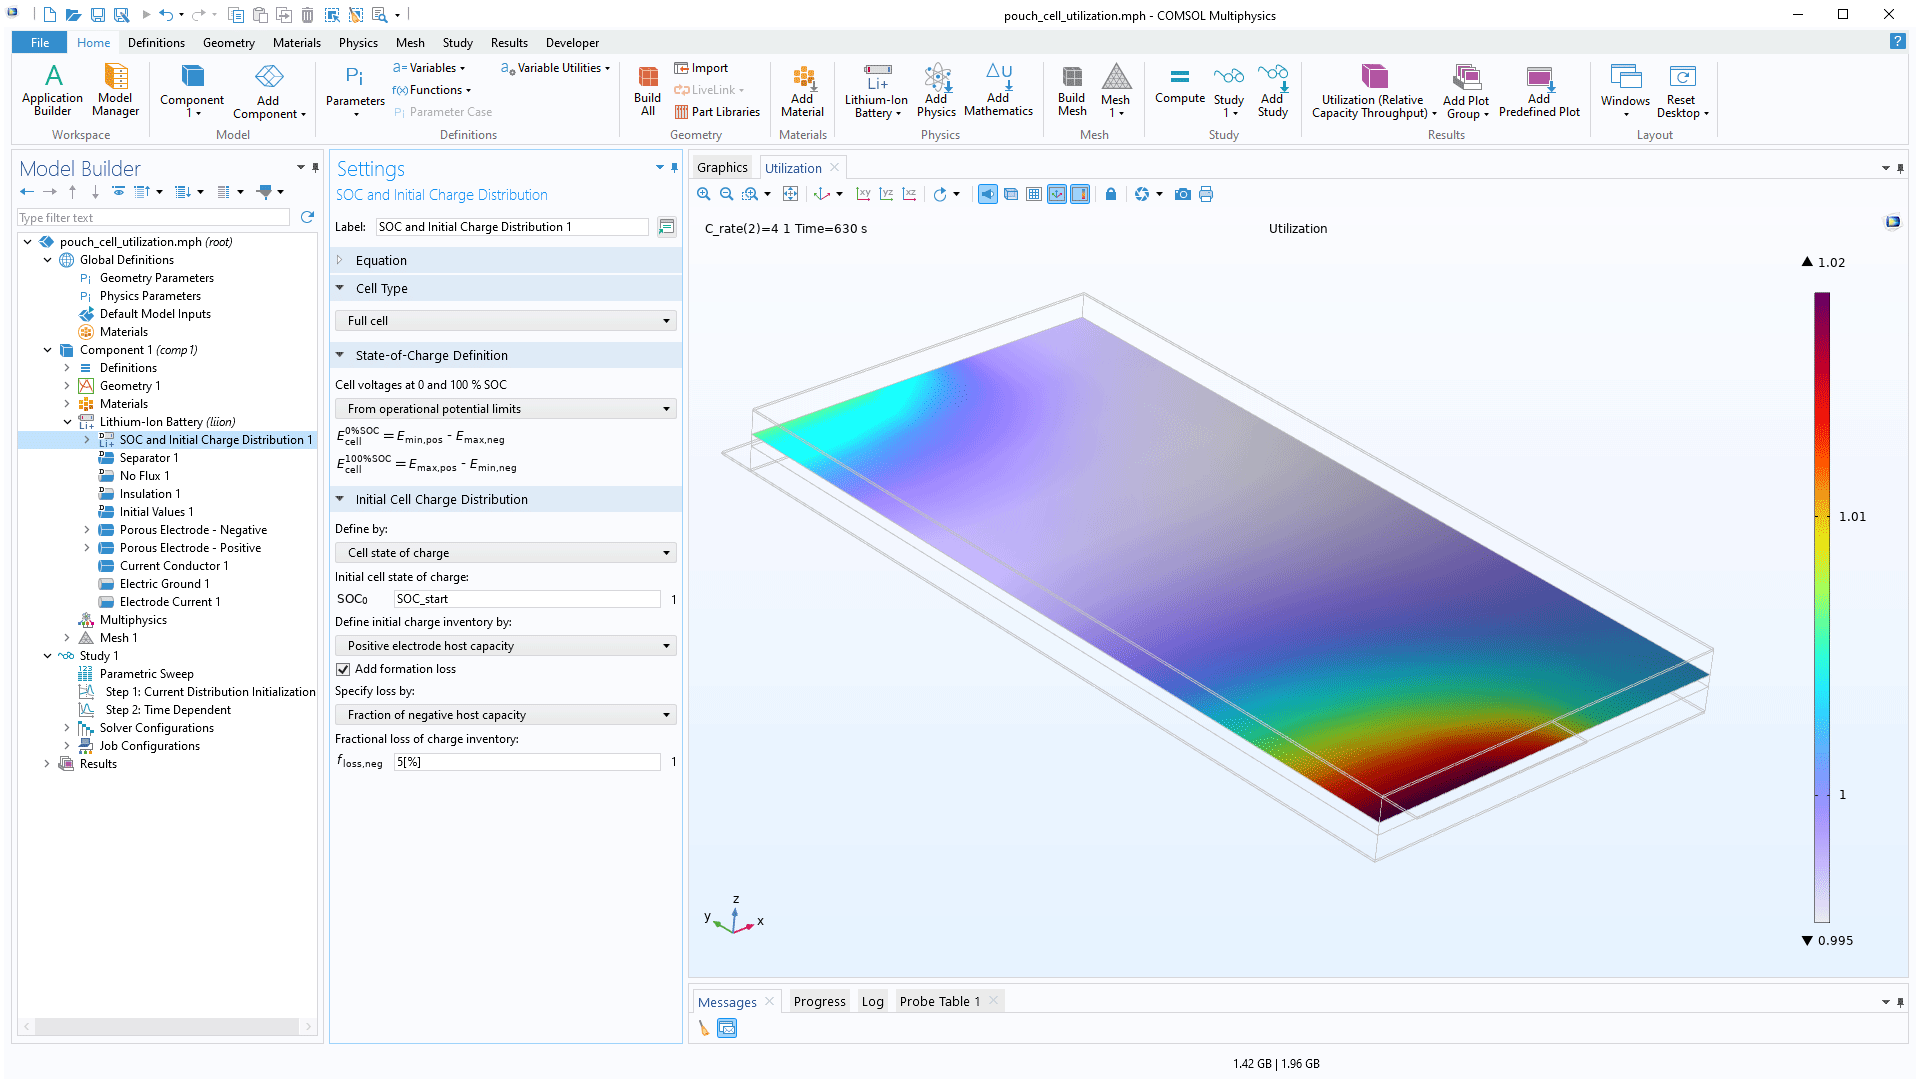 The COMSOL Multiphysics UI showing the Model Builder with the SOC and Initial Cell Charge Distribution node highlighted, the corresponding Settings window, and a battery model in the Graphics window.